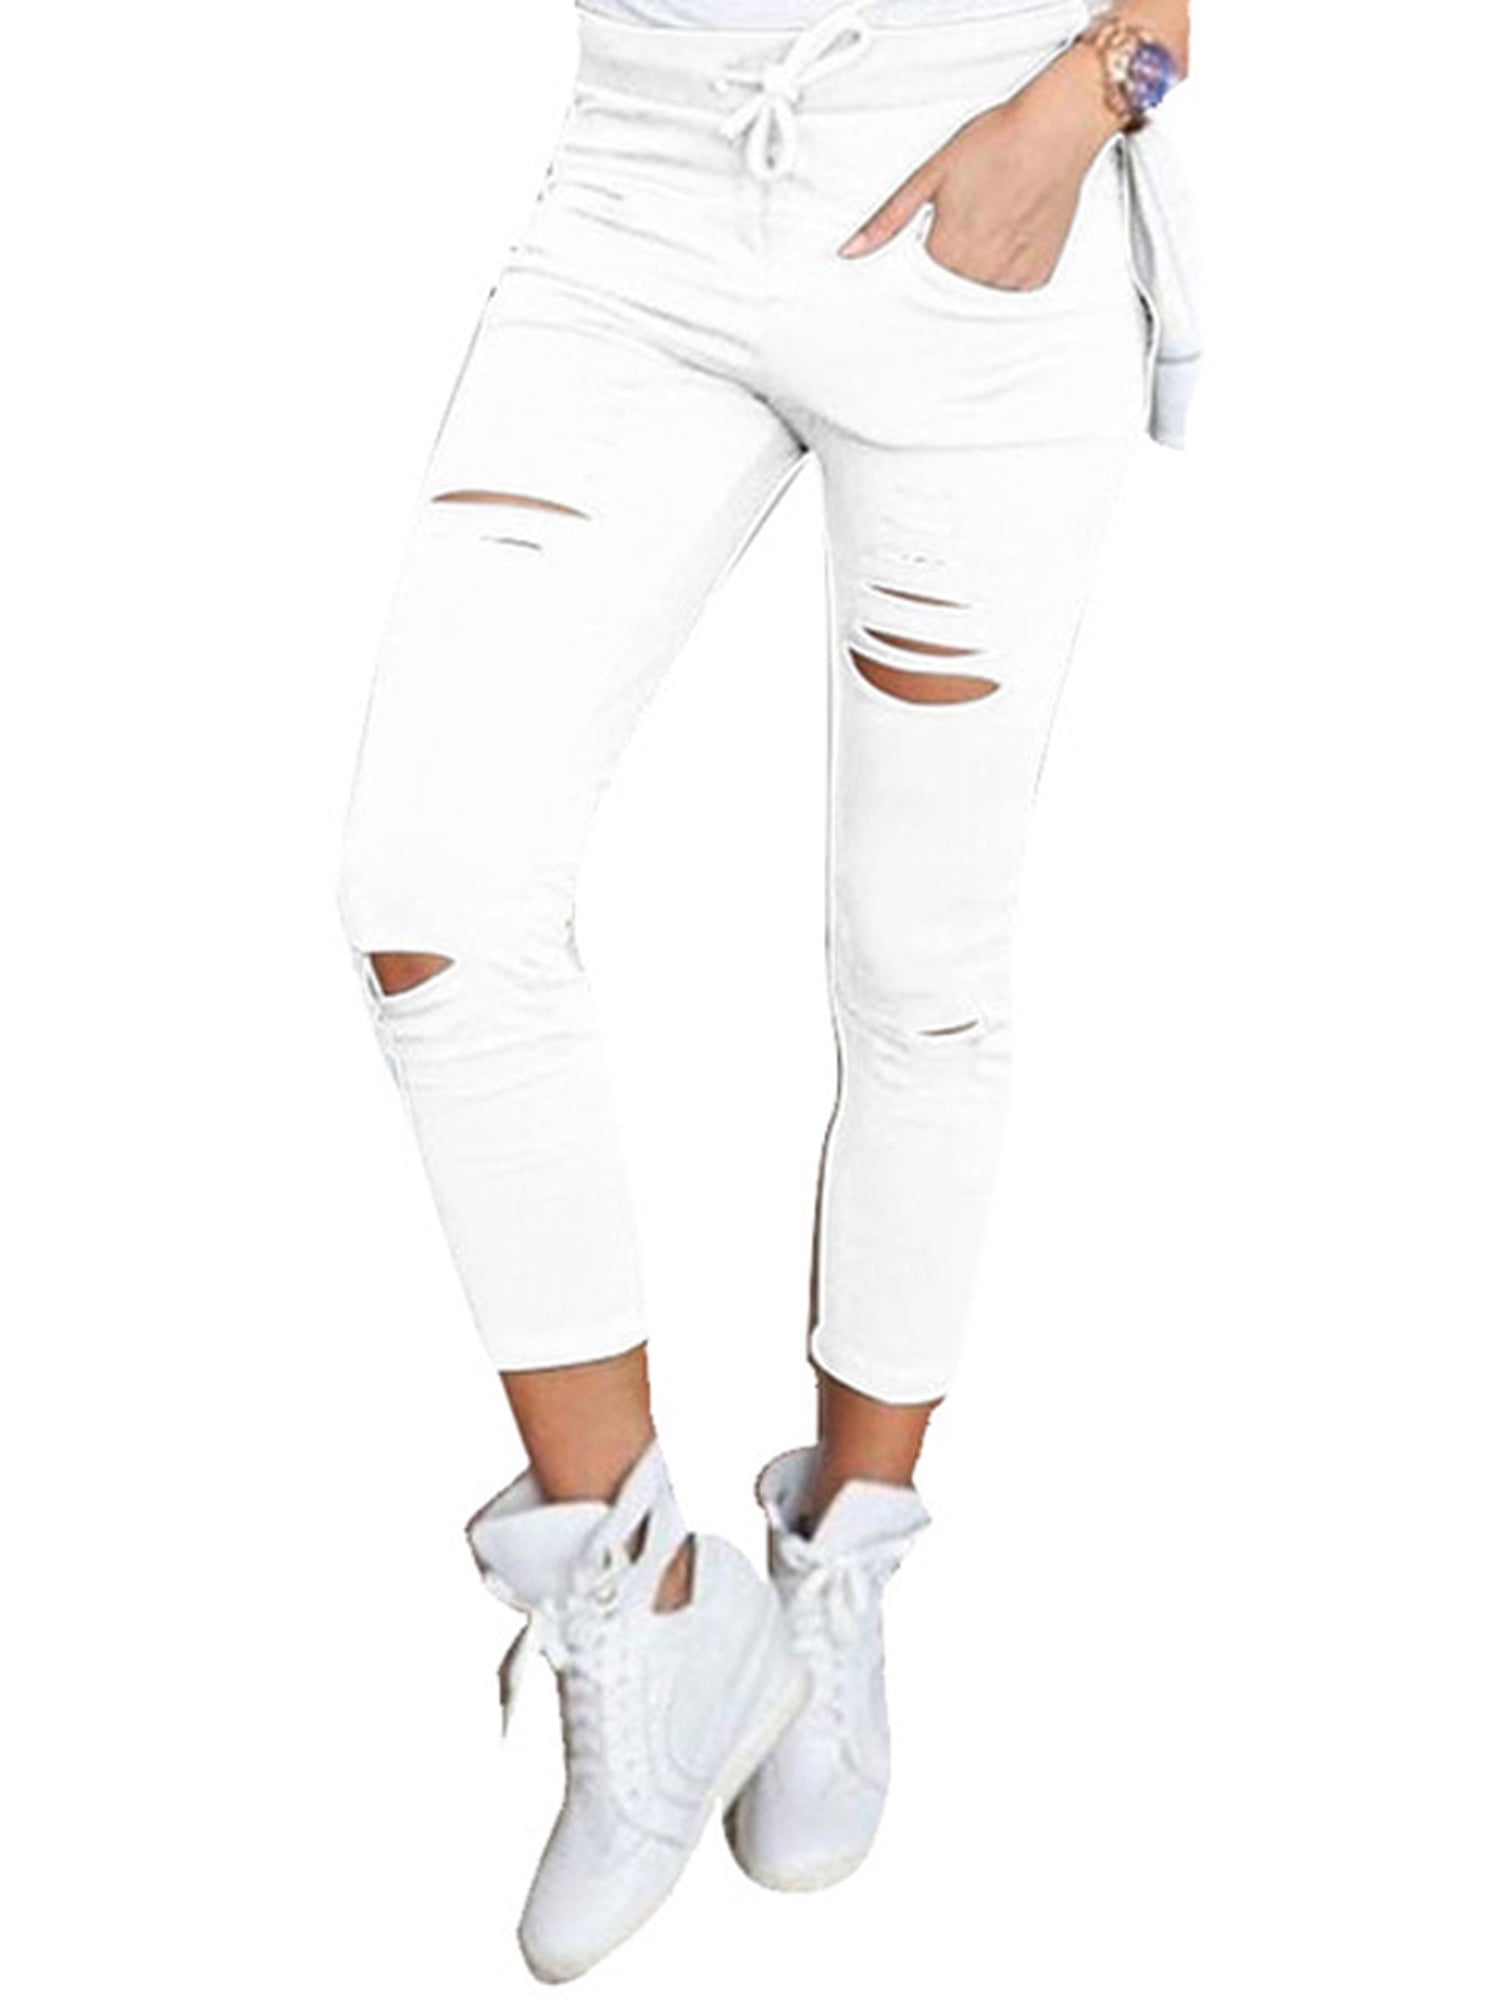 Women Skinny Ripped Holes Jeans Pants Casual Stretch Slim Pencil ...